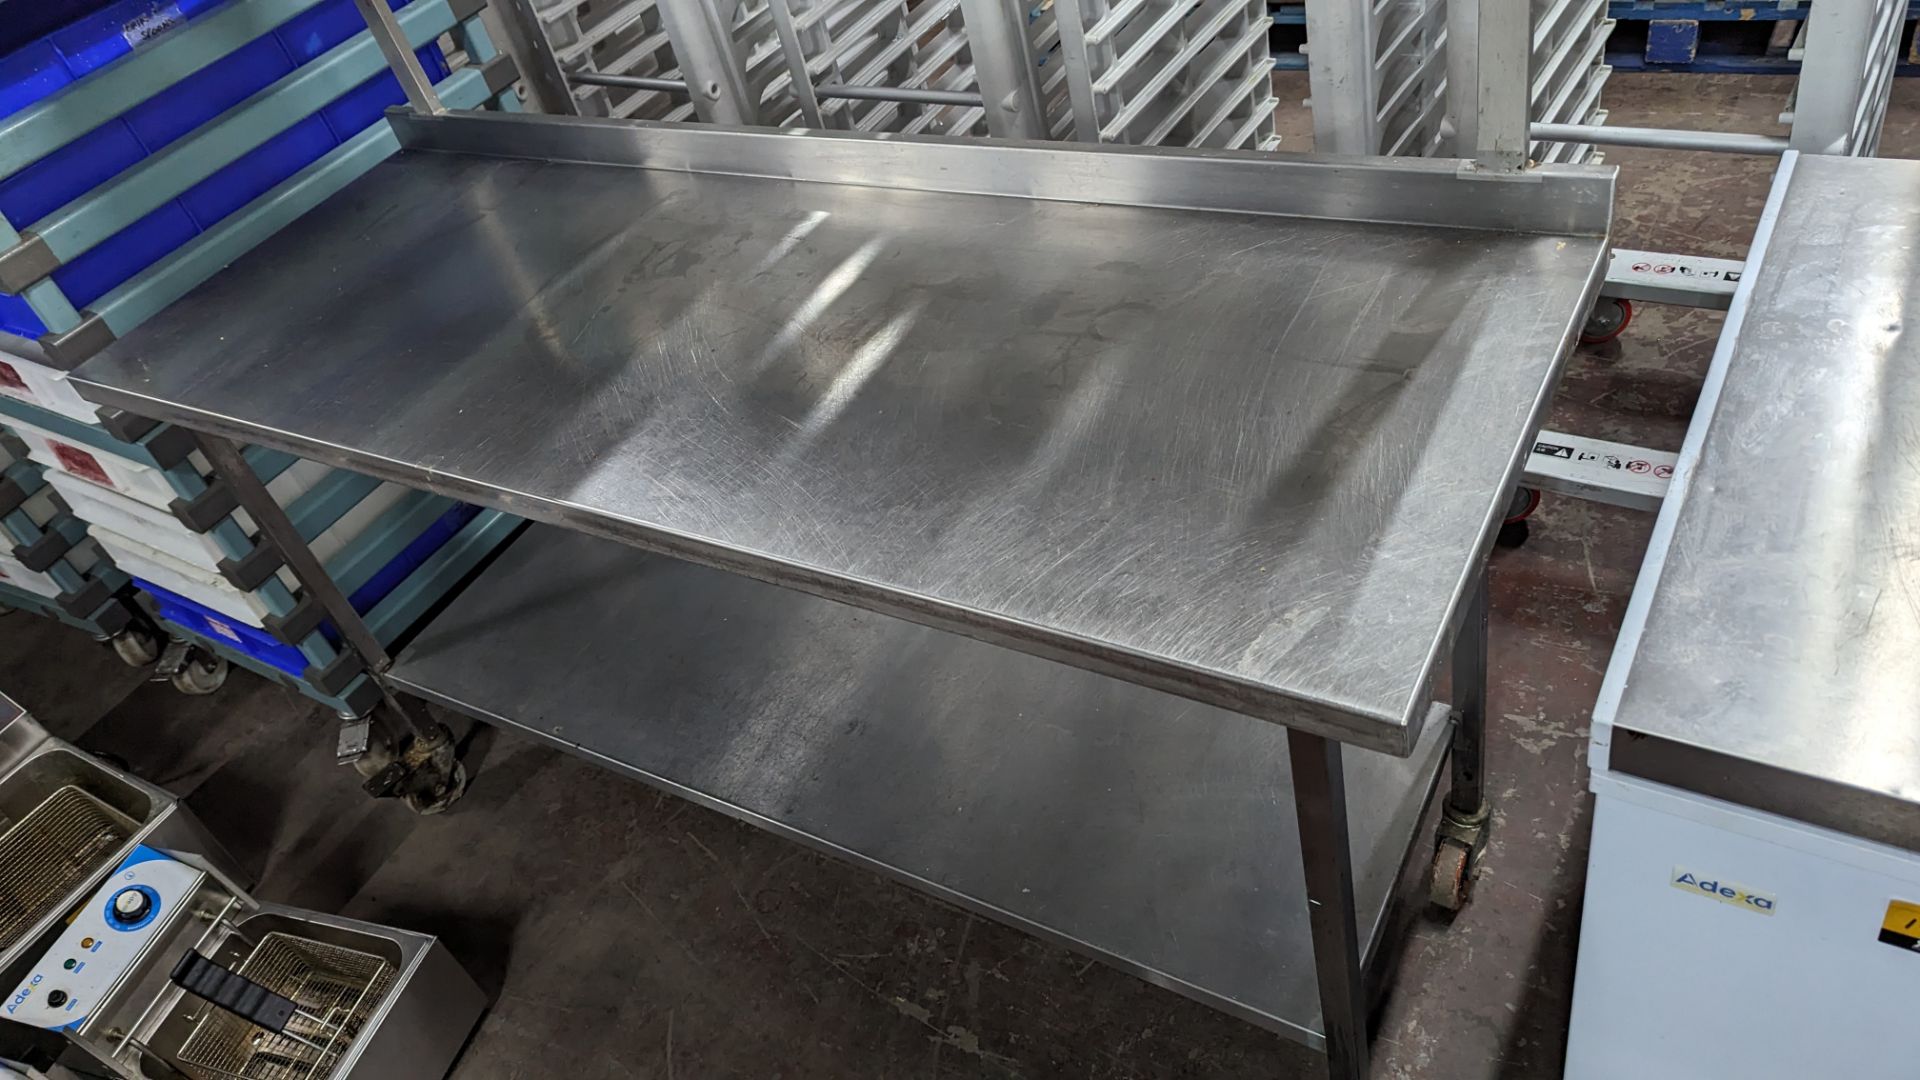 Mobile stainless steel triple tier table. Max dimensions approx. 1660mm x 600mm x 1310mm - Image 3 of 4